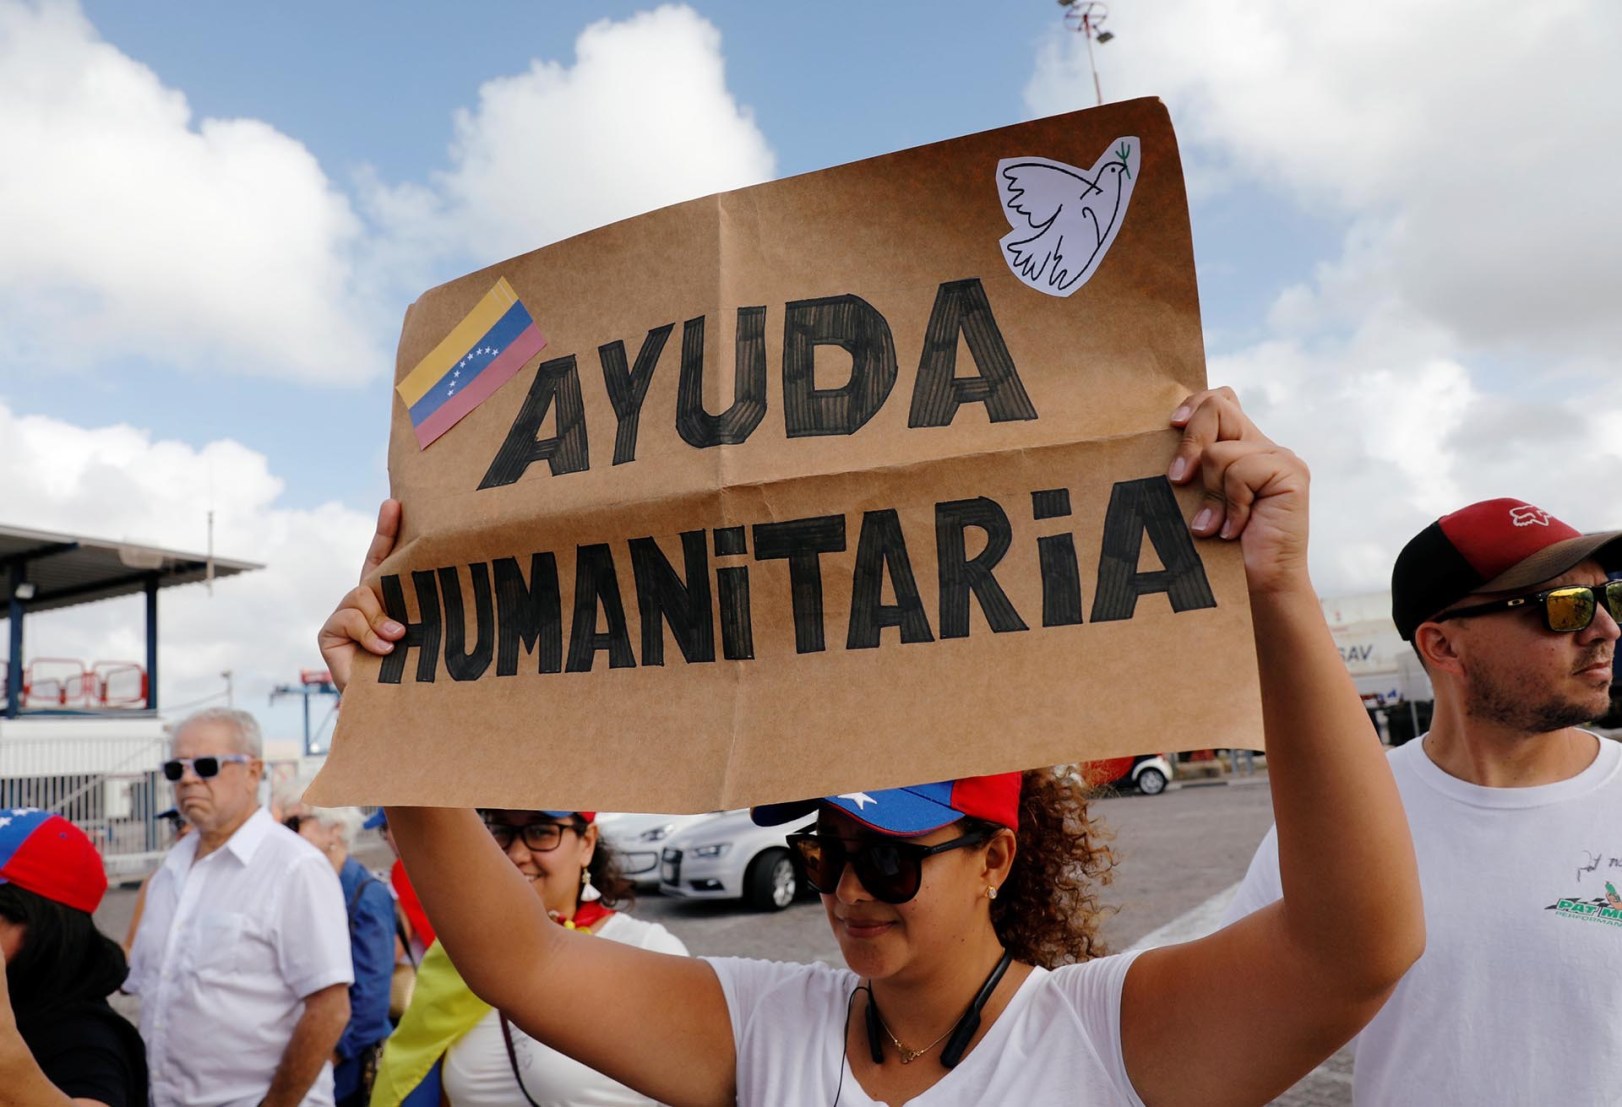 Supporters of Venezuela's opposition leader Juan Guaido hold flags and signs backing the humanitarian aid at the port in Willemstad on the island of Curacao, February 23, 2019. REUTERS/Henry Romero